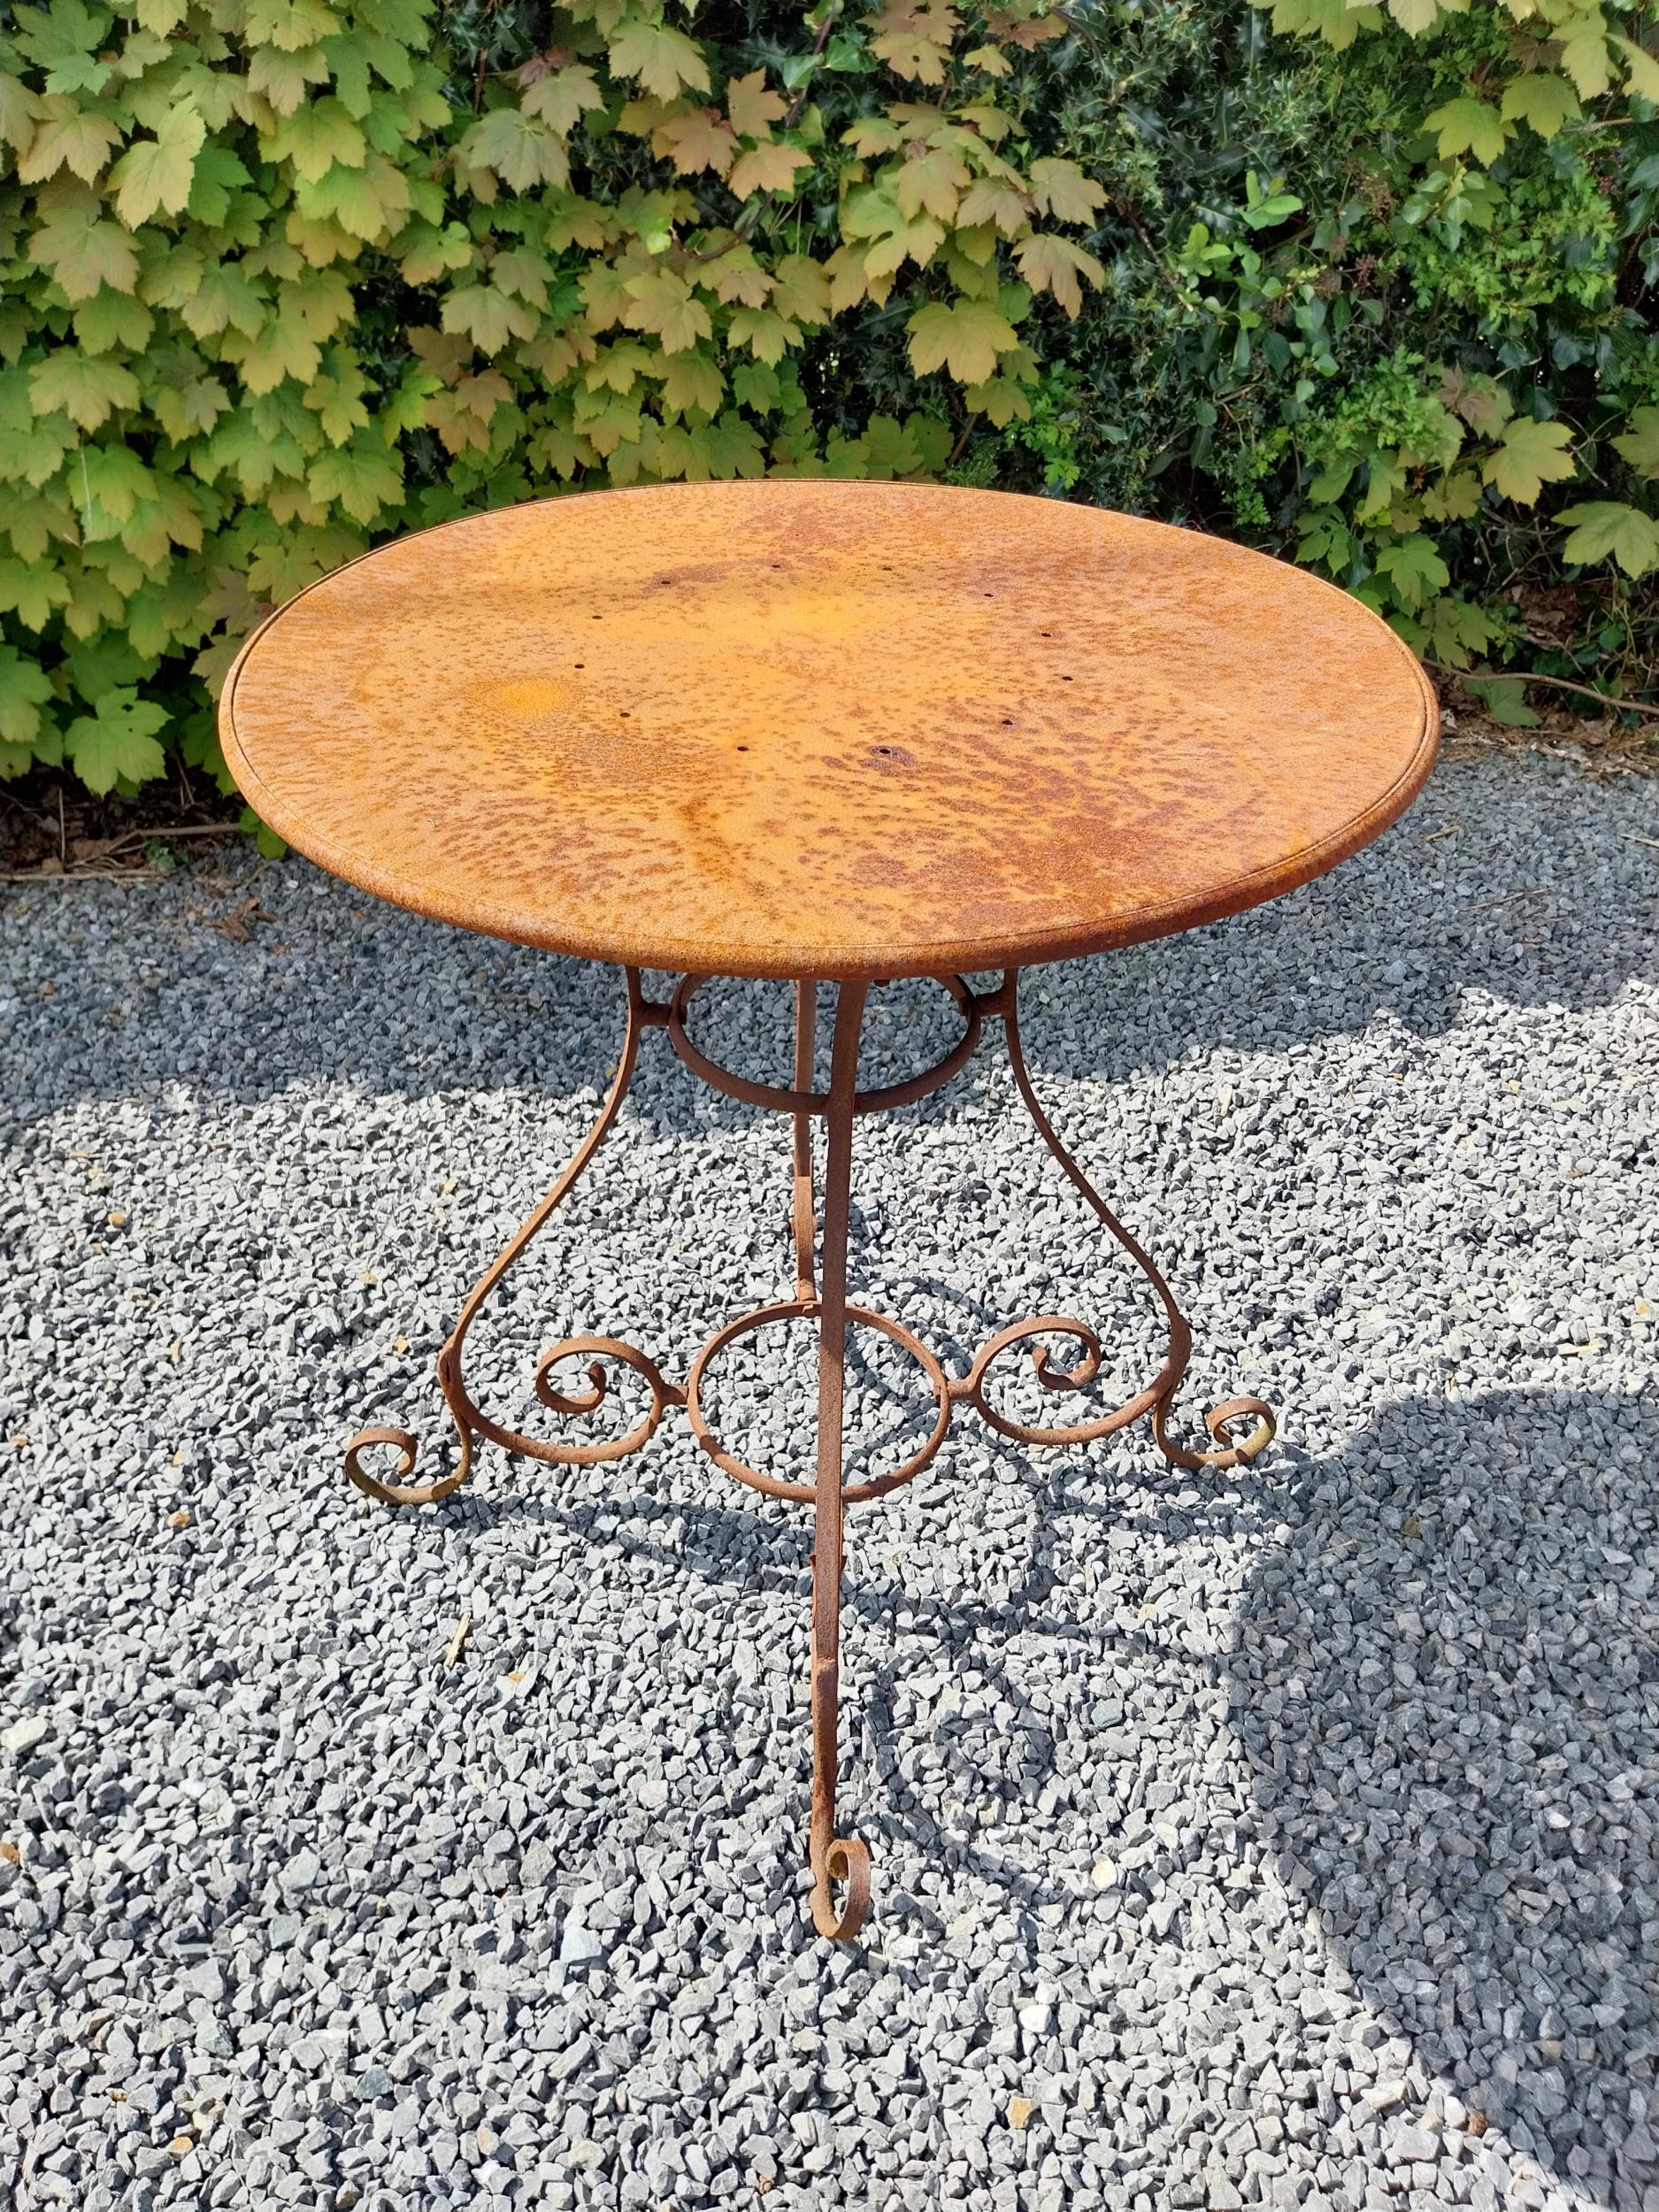 Wrought iron café - garden circular table with two matching chairs {Tbl. 75 cm H x 70 cm Dia. Chairs - Image 9 of 10